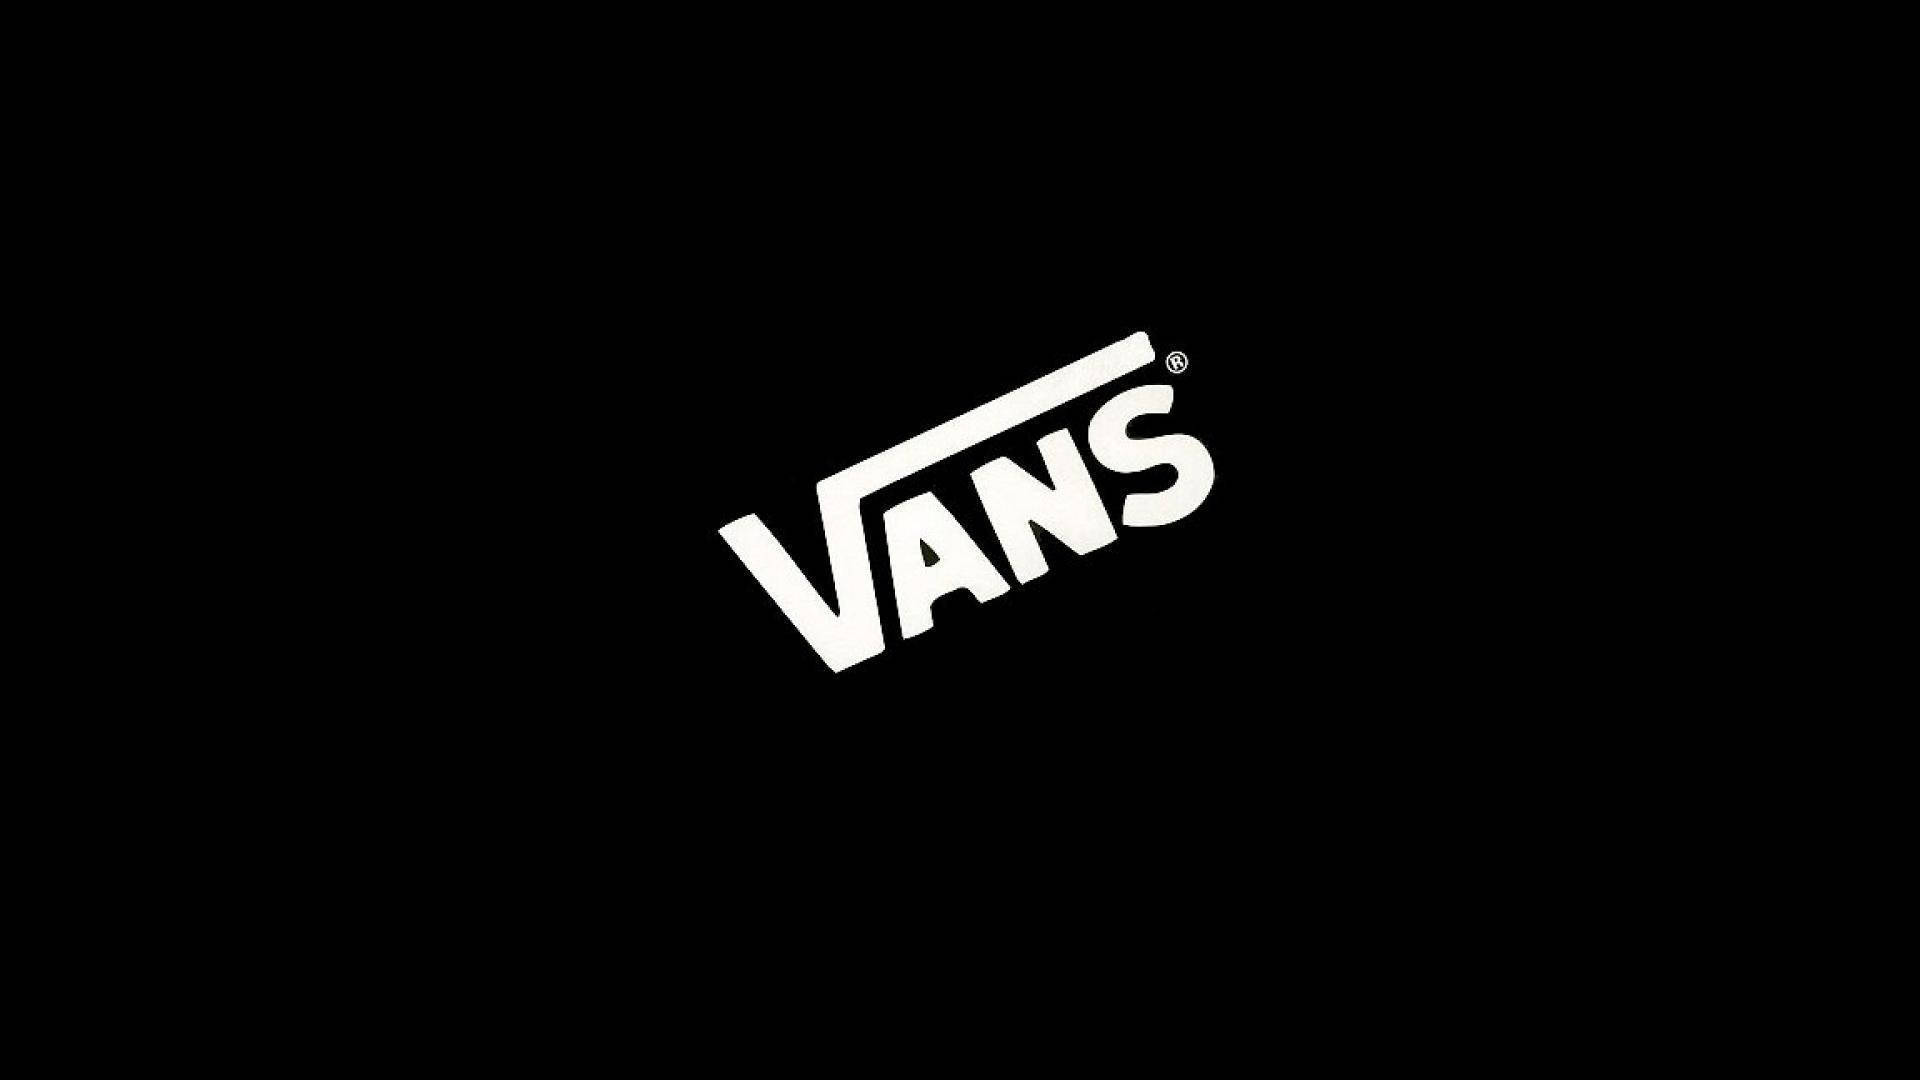 Step Out In Style With Iconic Vans Logos Wallpaper